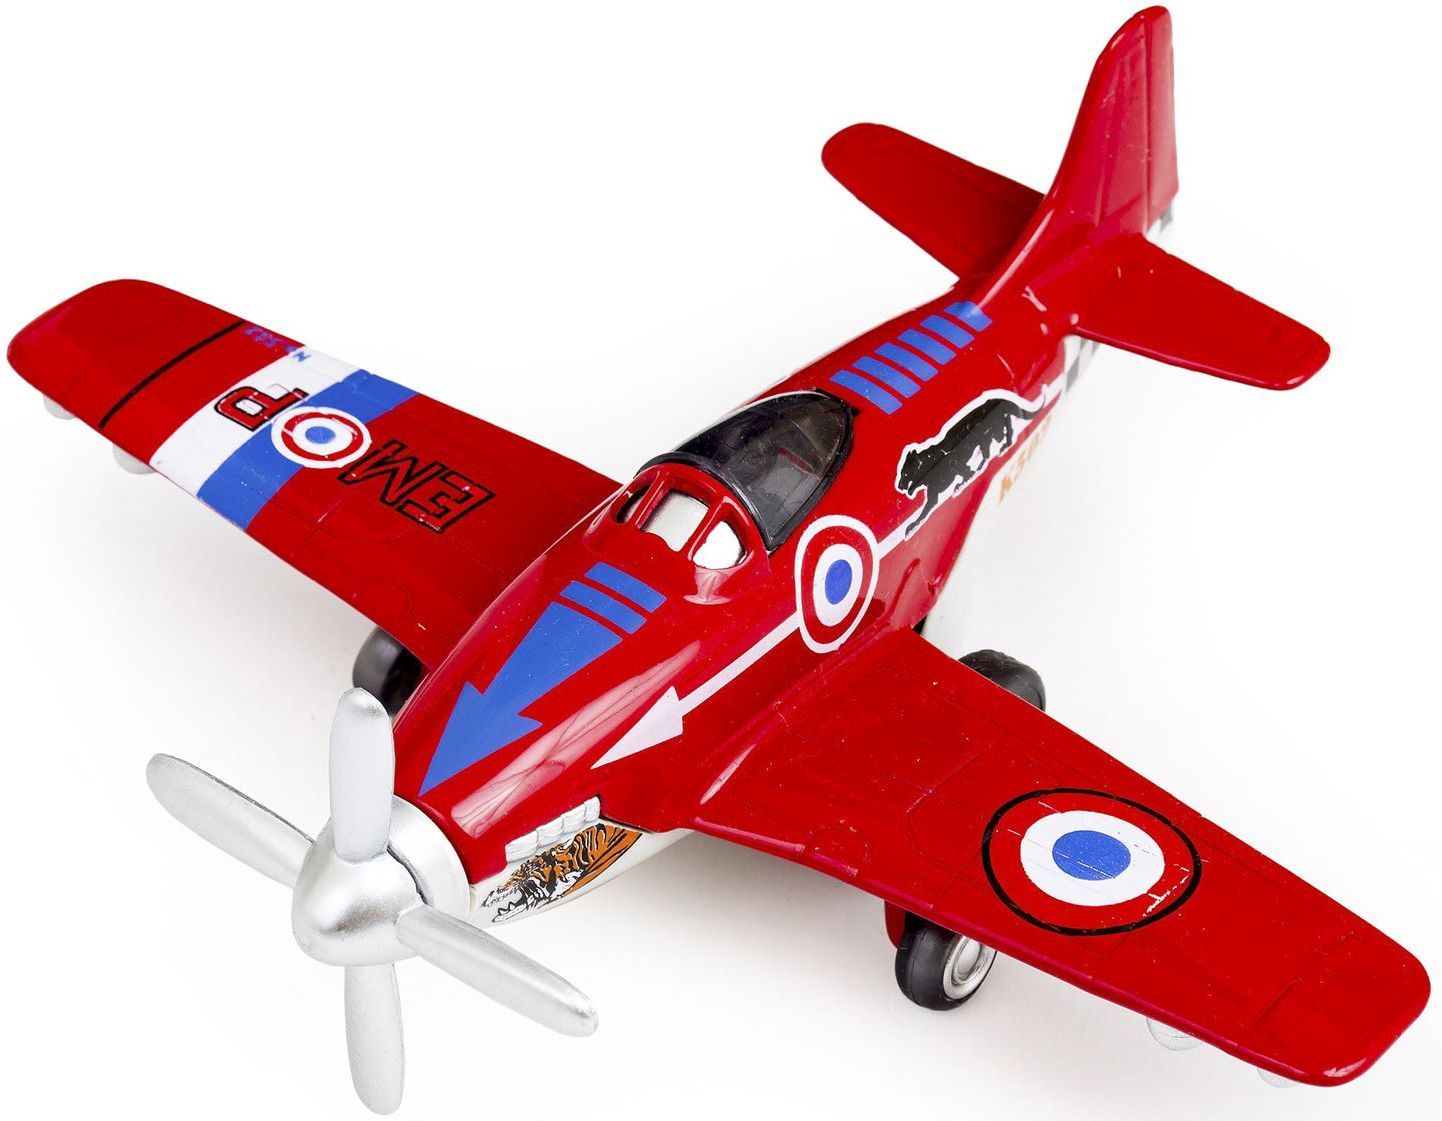 Fumfings Air Chief Prop Planes - red